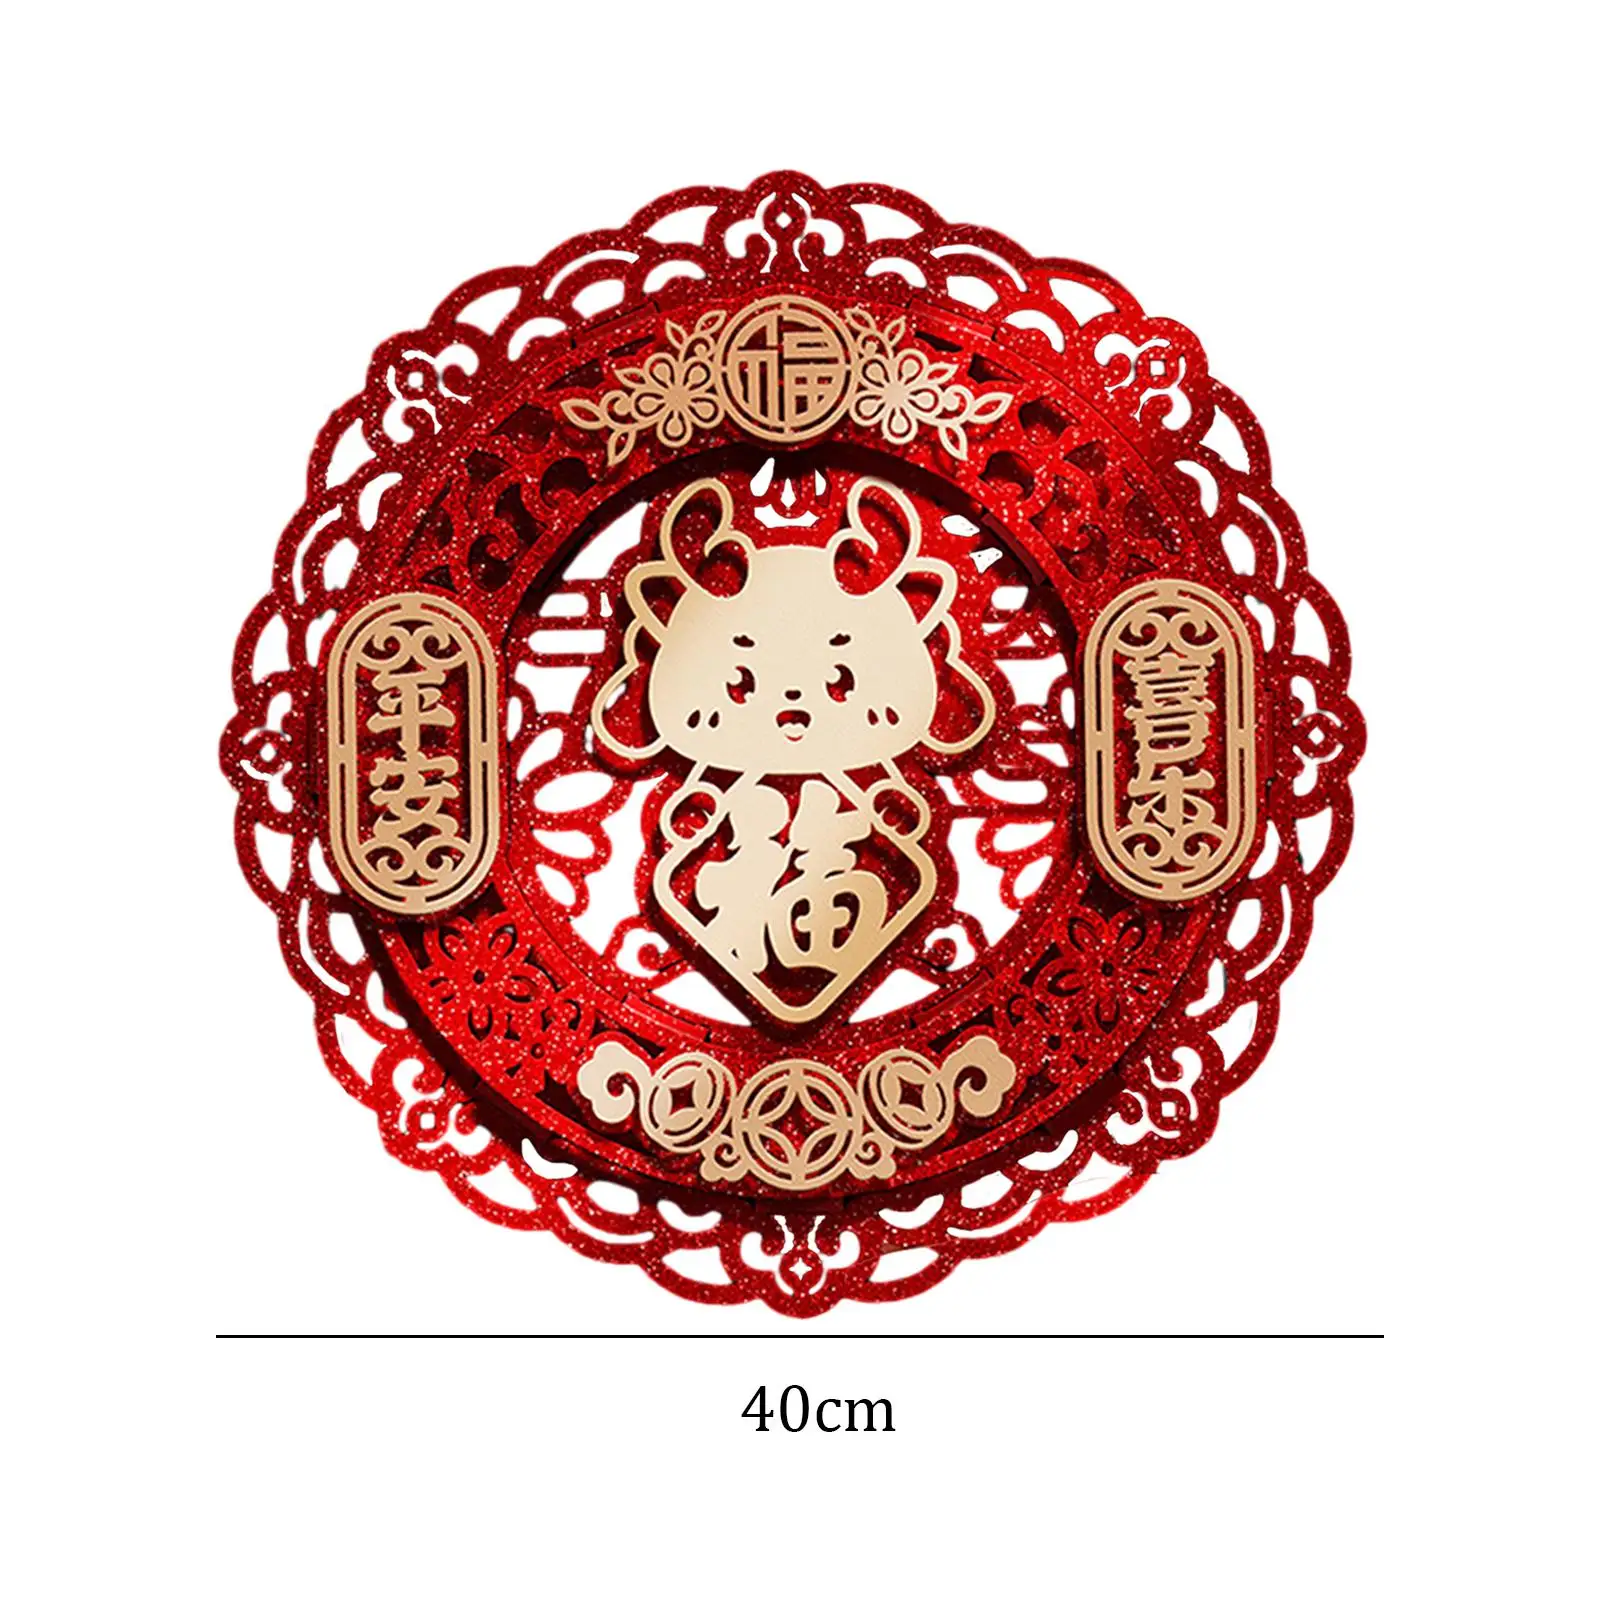 Year of The Dragon Stickers Ornament Window Clings Red Chinese New Year Decoration for School Office Store Home Spring Festival